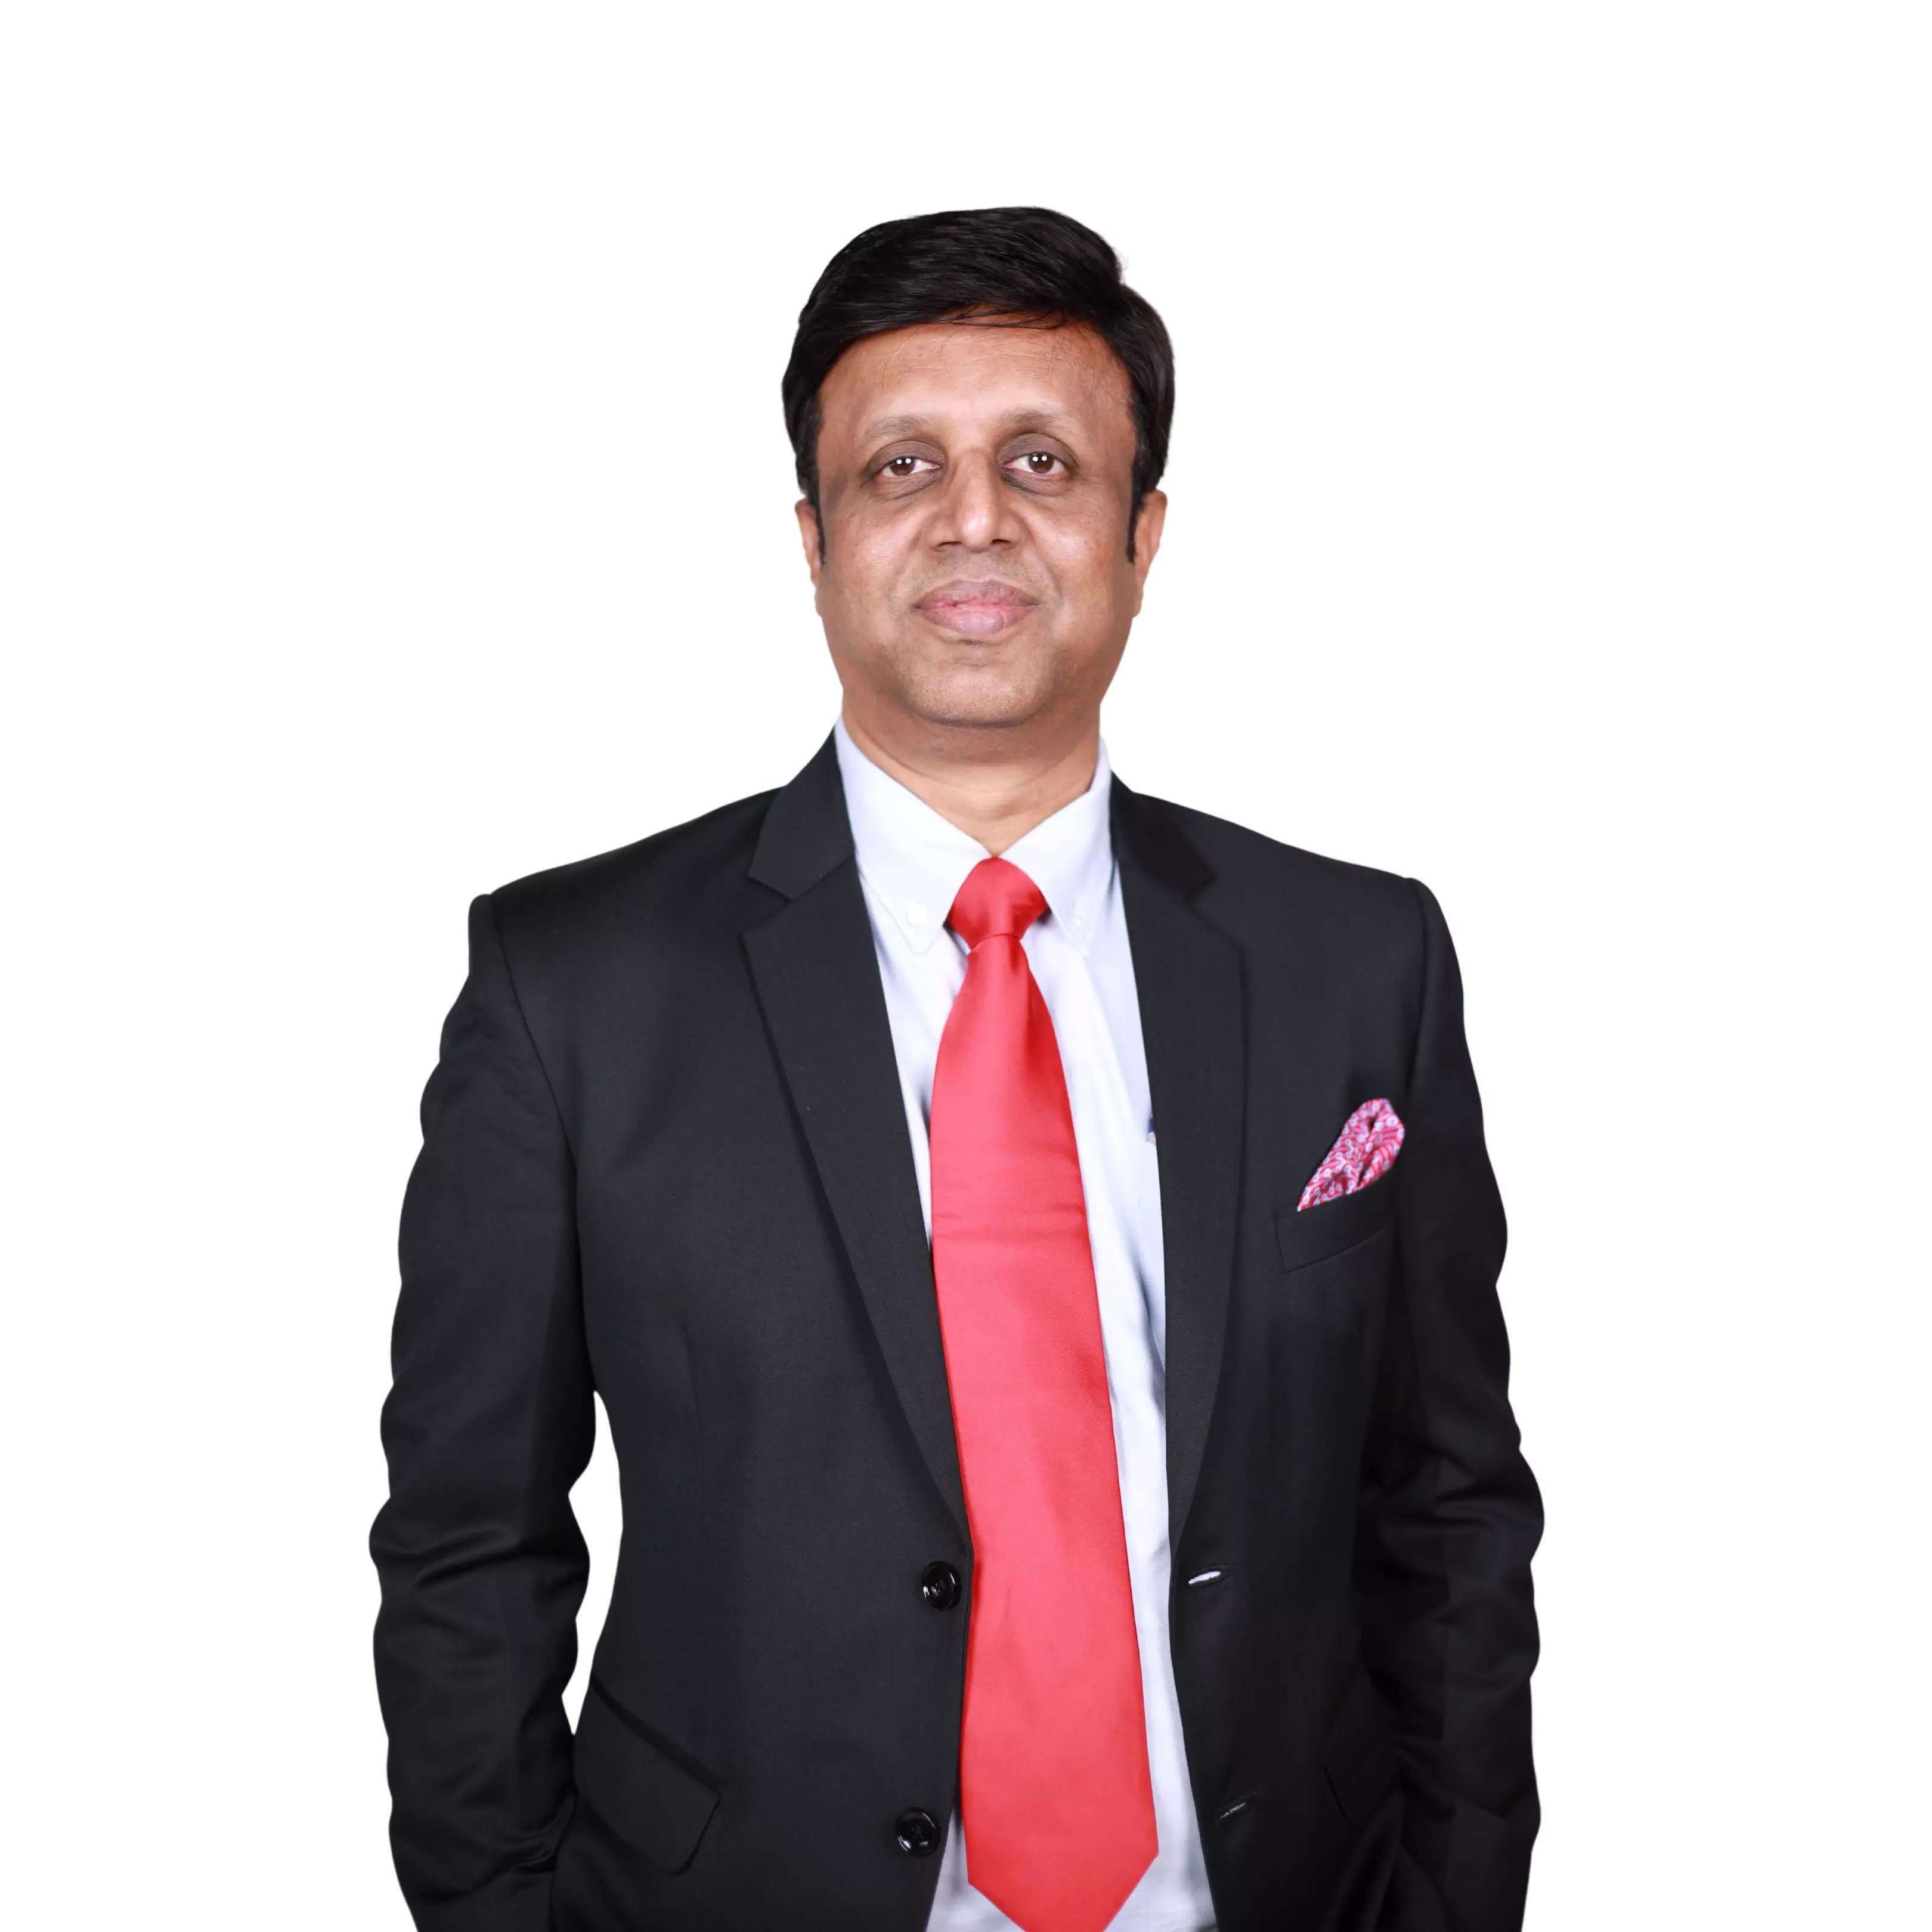     Sunil Pathare, president and MD, VIP Clothing